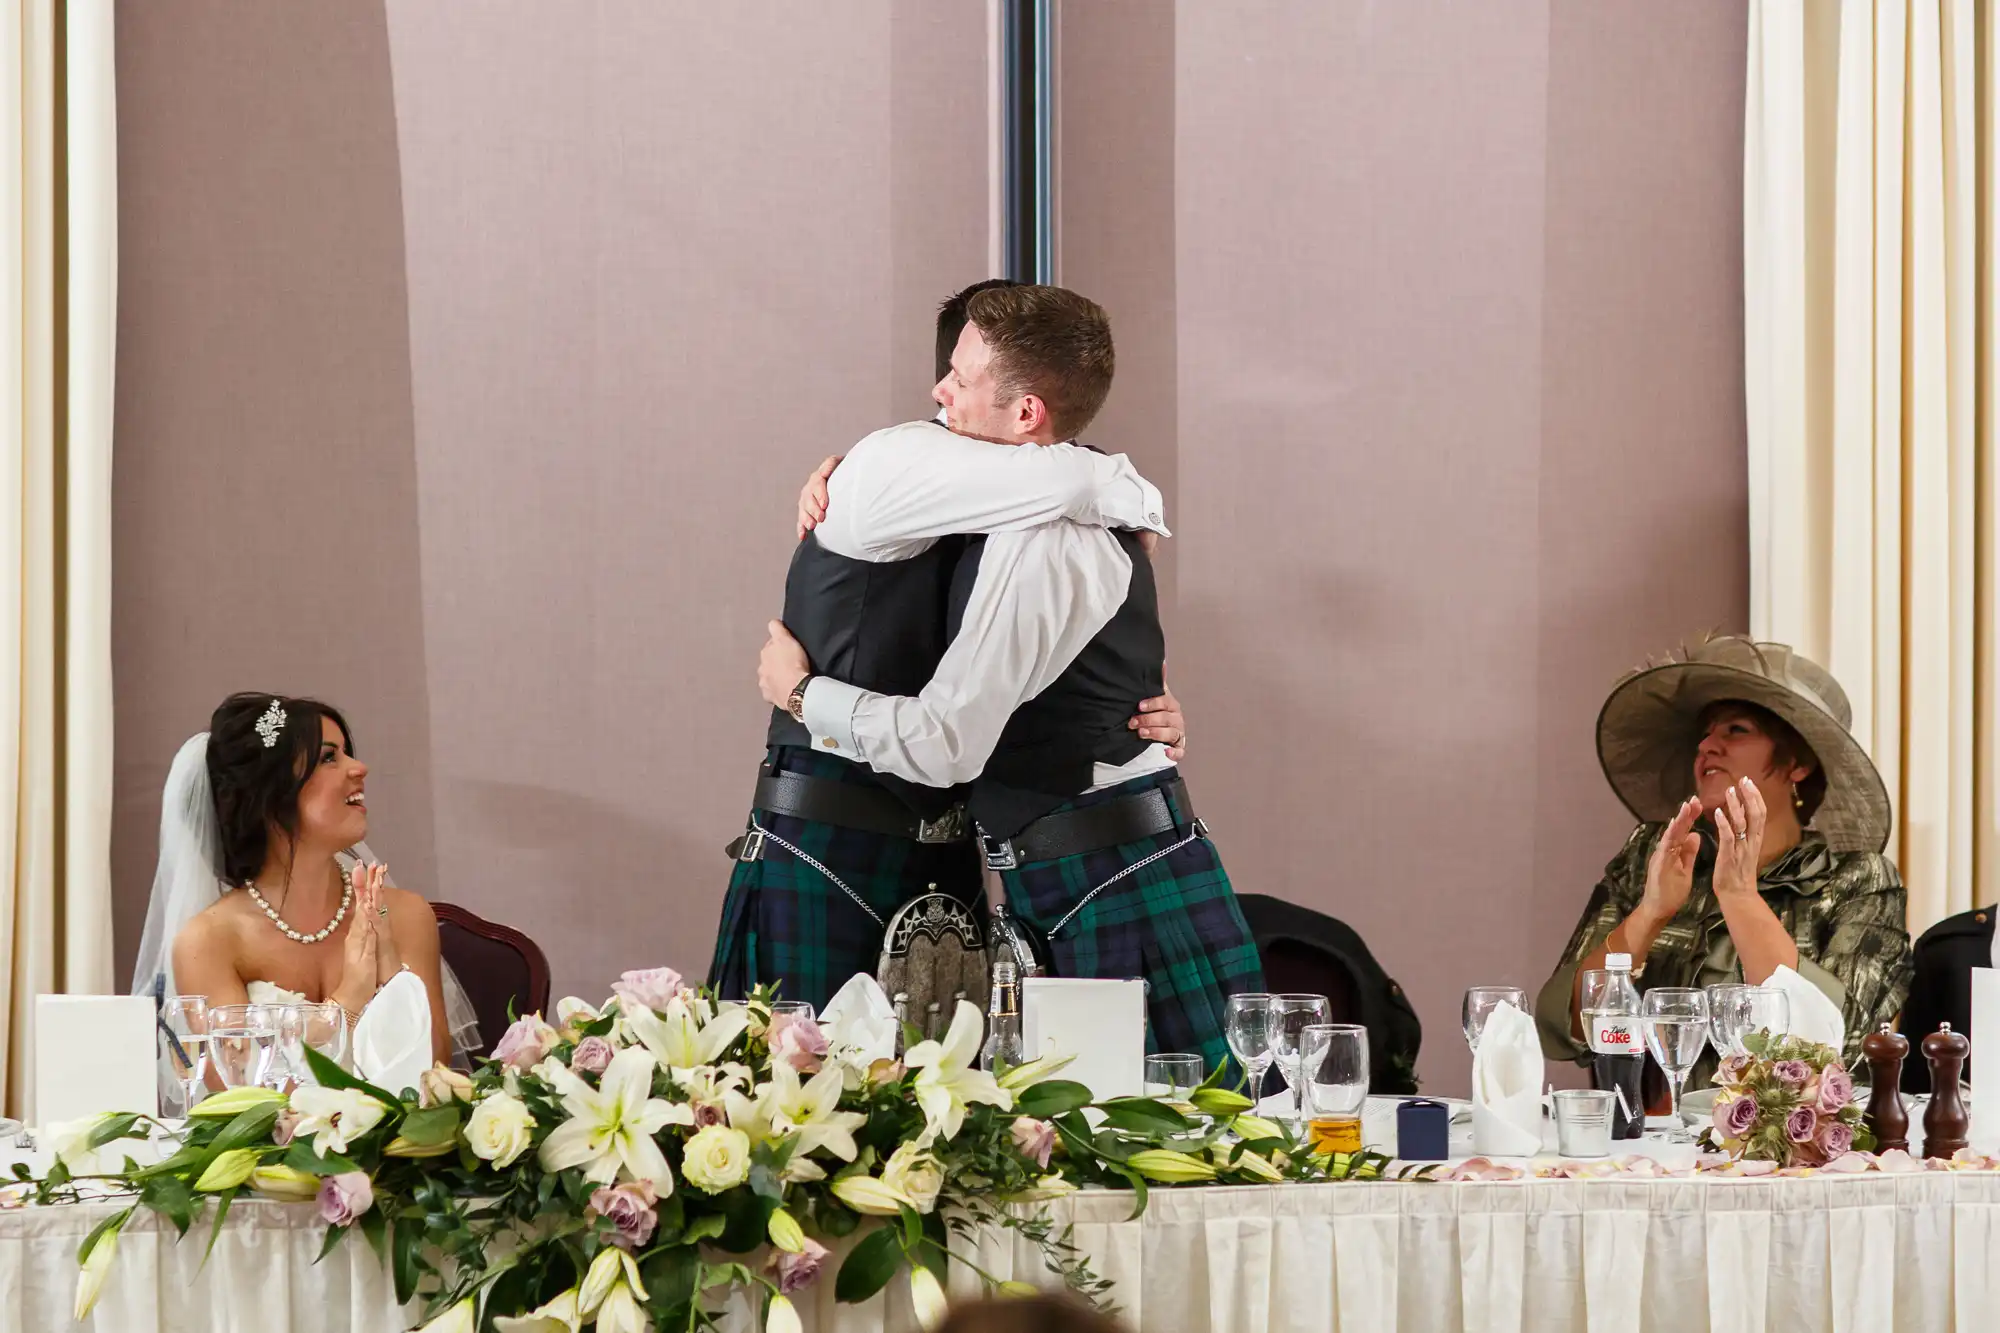 Two men in formal attire, one wearing a kilt, embrace at a wedding reception as seated guests look on smiling.